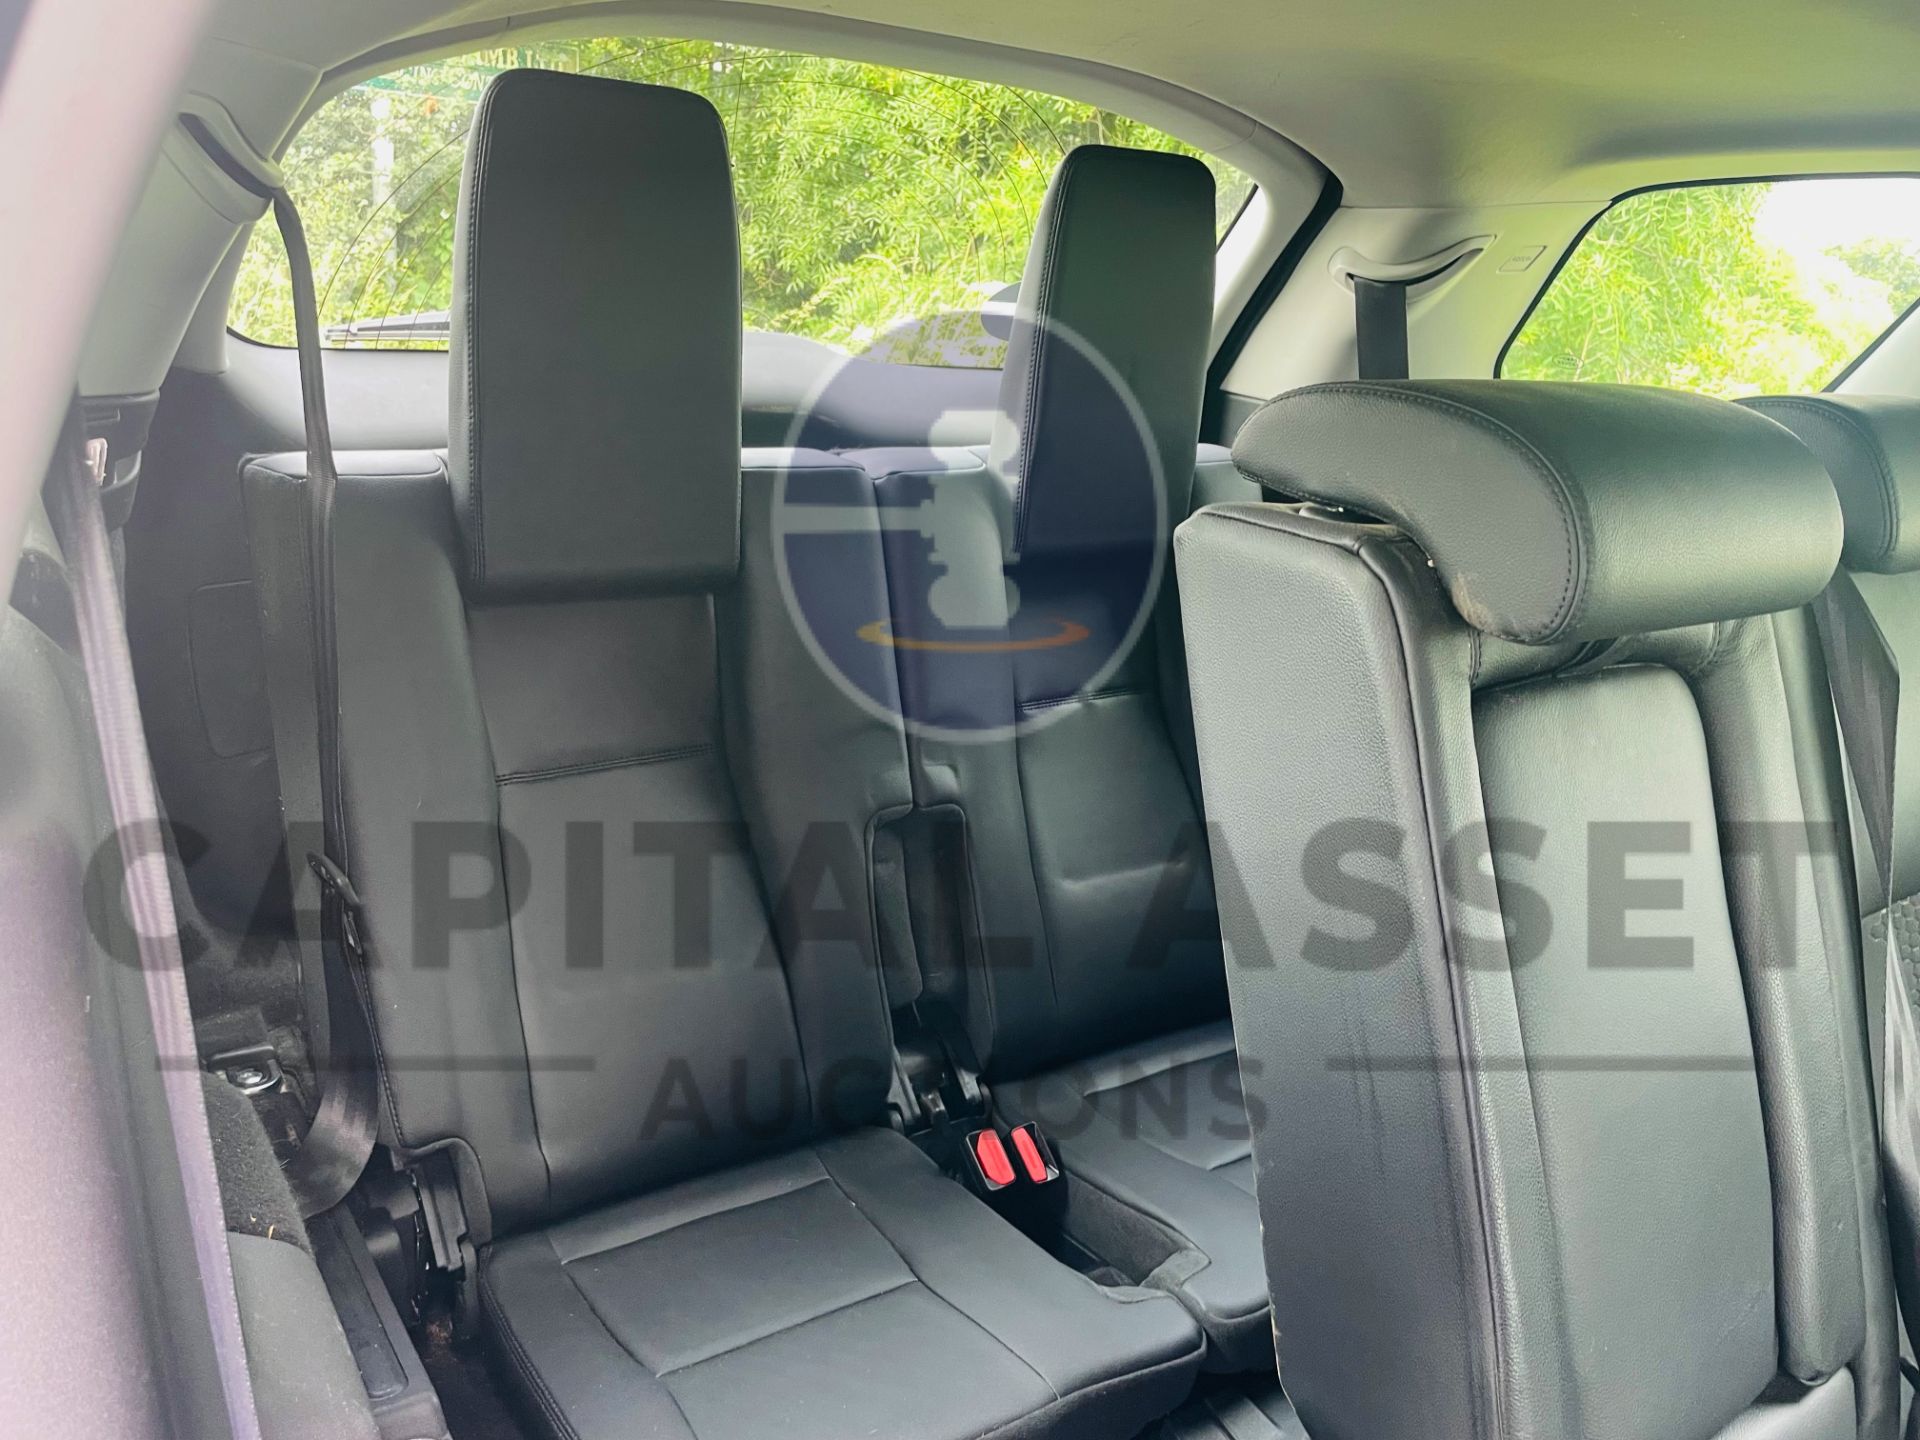 LAND ROVER DISCOVERY SPORT *SE TECH* 7 SEATER SUV (2016) 2.0 TD4 - AUTO *LEATHER & NAV* (NO VAT) - Image 33 of 54